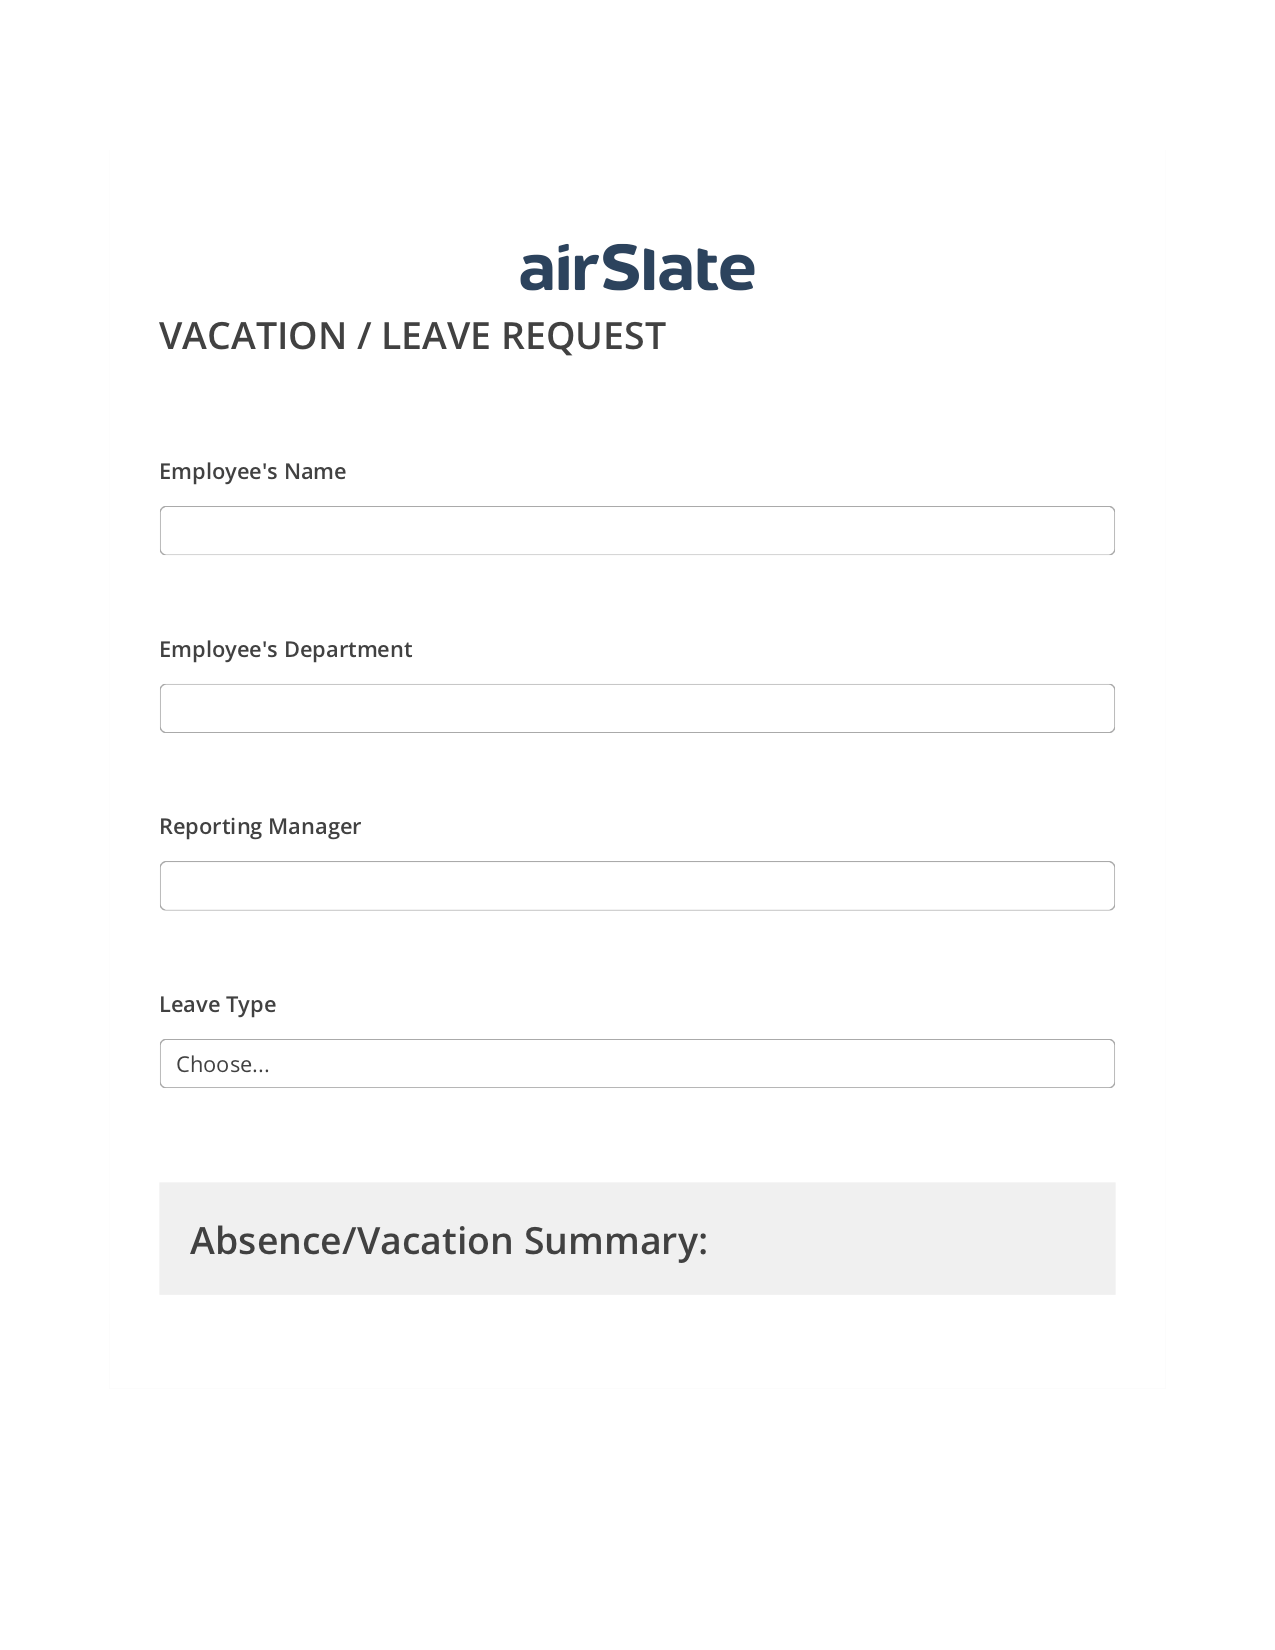 Multirole Vacation/Leave Request Workflow Pre-fill from another Slate Bot, Send a Slate to MS Dynamics 365 Contact Bot, Post-finish Document Bot